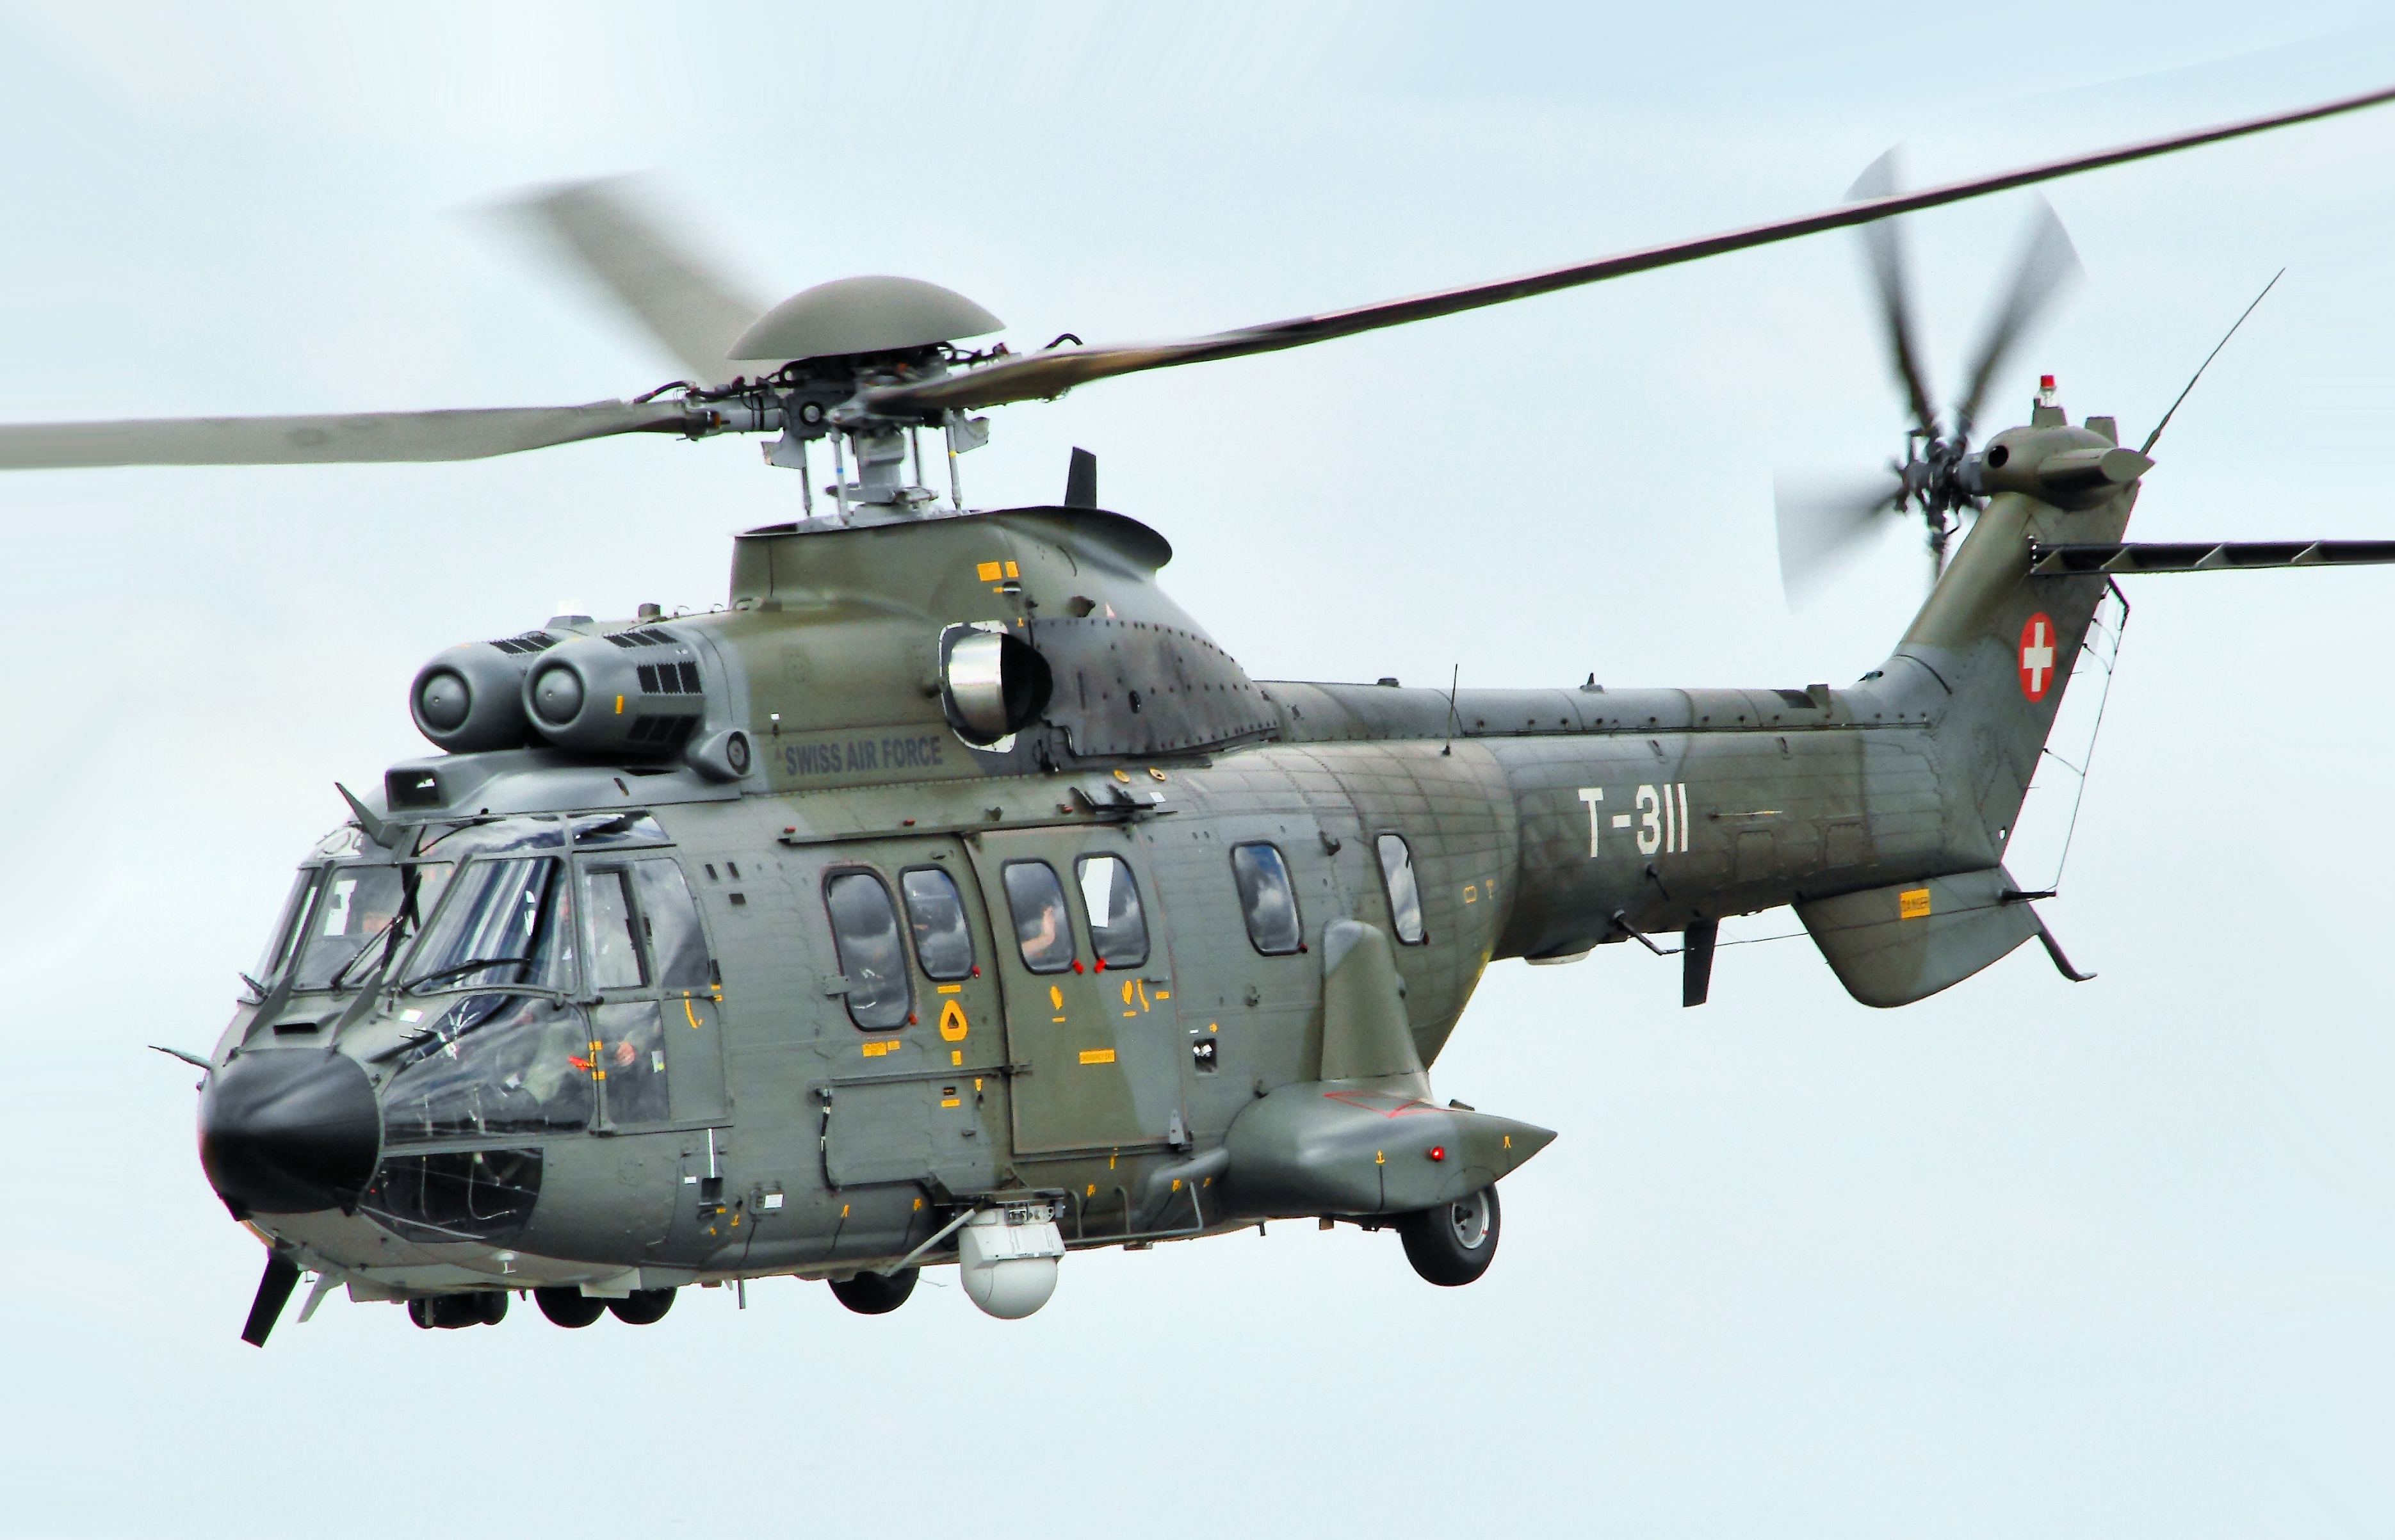 military, eurocopter as332 super puma, helicopter, swiss air force, military helicopters